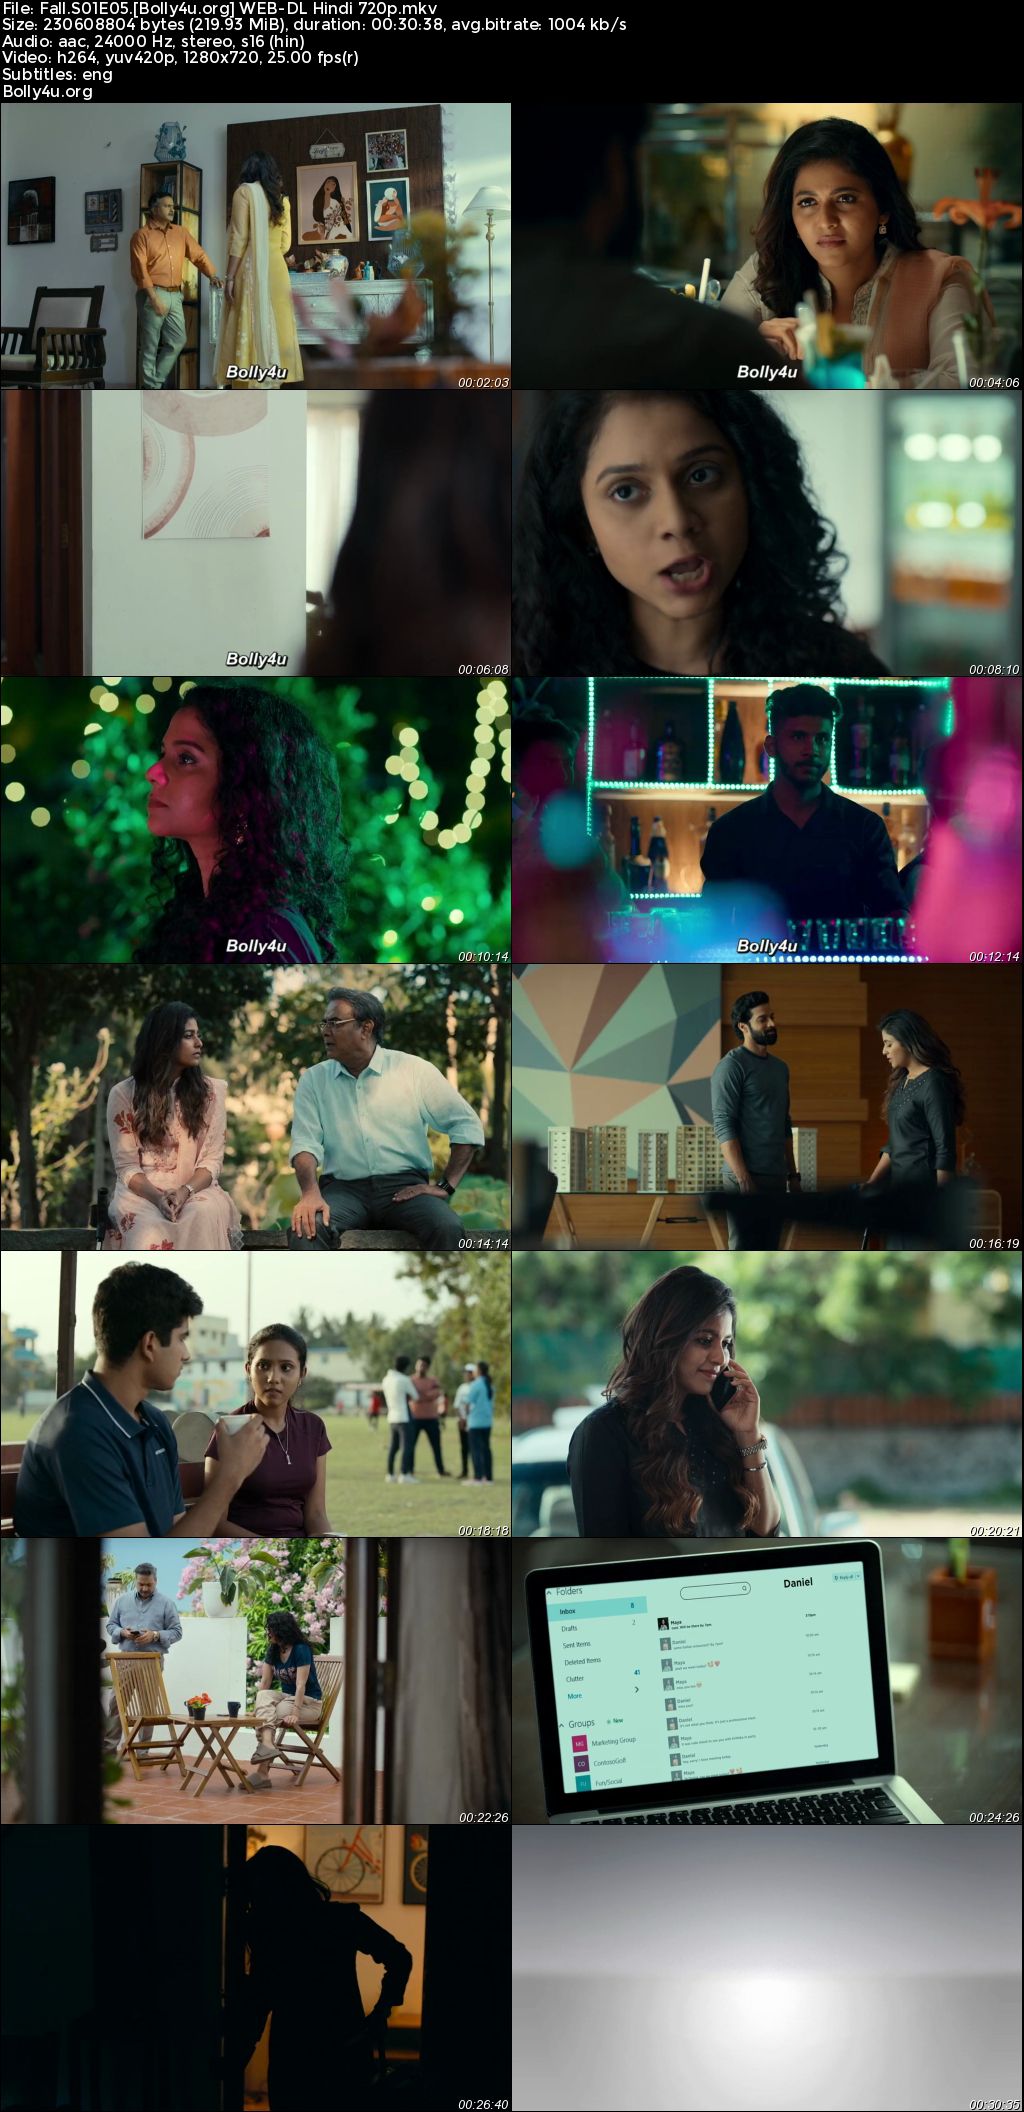 Fall 2022 WEB-DL Hindi S01 Complete Download 720p